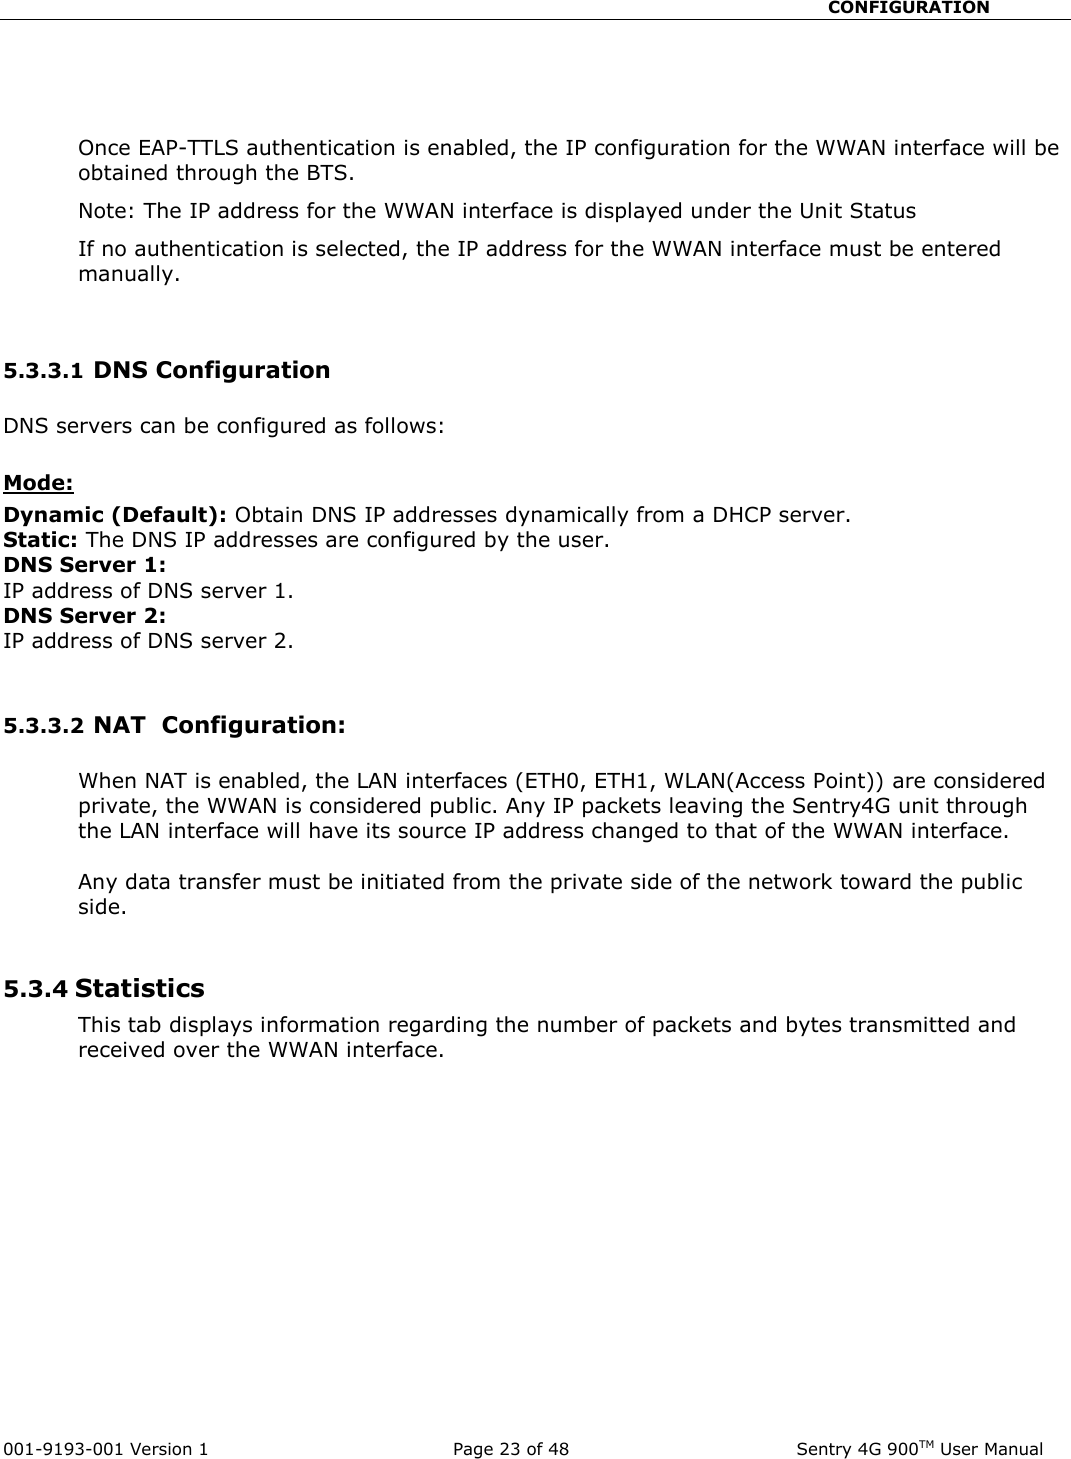                                                       CONFIGURATION  001-9193-001 Version 1              Page 23 of 48               Sentry 4G 900TM User Manual    Once EAP-TTLS authentication is enabled, the IP configuration for the WWAN interface will be obtained through the BTS.  Note: The IP address for the WWAN interface is displayed under the Unit Status If no authentication is selected, the IP address for the WWAN interface must be entered manually.    5.3.3.1 DNS Configuration  DNS servers can be configured as follows:  Mode: Dynamic (Default): Obtain DNS IP addresses dynamically from a DHCP server. Static: The DNS IP addresses are configured by the user. DNS Server 1: IP address of DNS server 1. DNS Server 2: IP address of DNS server 2.   5.3.3.2 NAT  Configuration:  When NAT is enabled, the LAN interfaces (ETH0, ETH1, WLAN(Access Point)) are considered private, the WWAN is considered public. Any IP packets leaving the Sentry4G unit through the LAN interface will have its source IP address changed to that of the WWAN interface.  Any data transfer must be initiated from the private side of the network toward the public side.   5.3.4 Statistics  This tab displays information regarding the number of packets and bytes transmitted and received over the WWAN interface.  